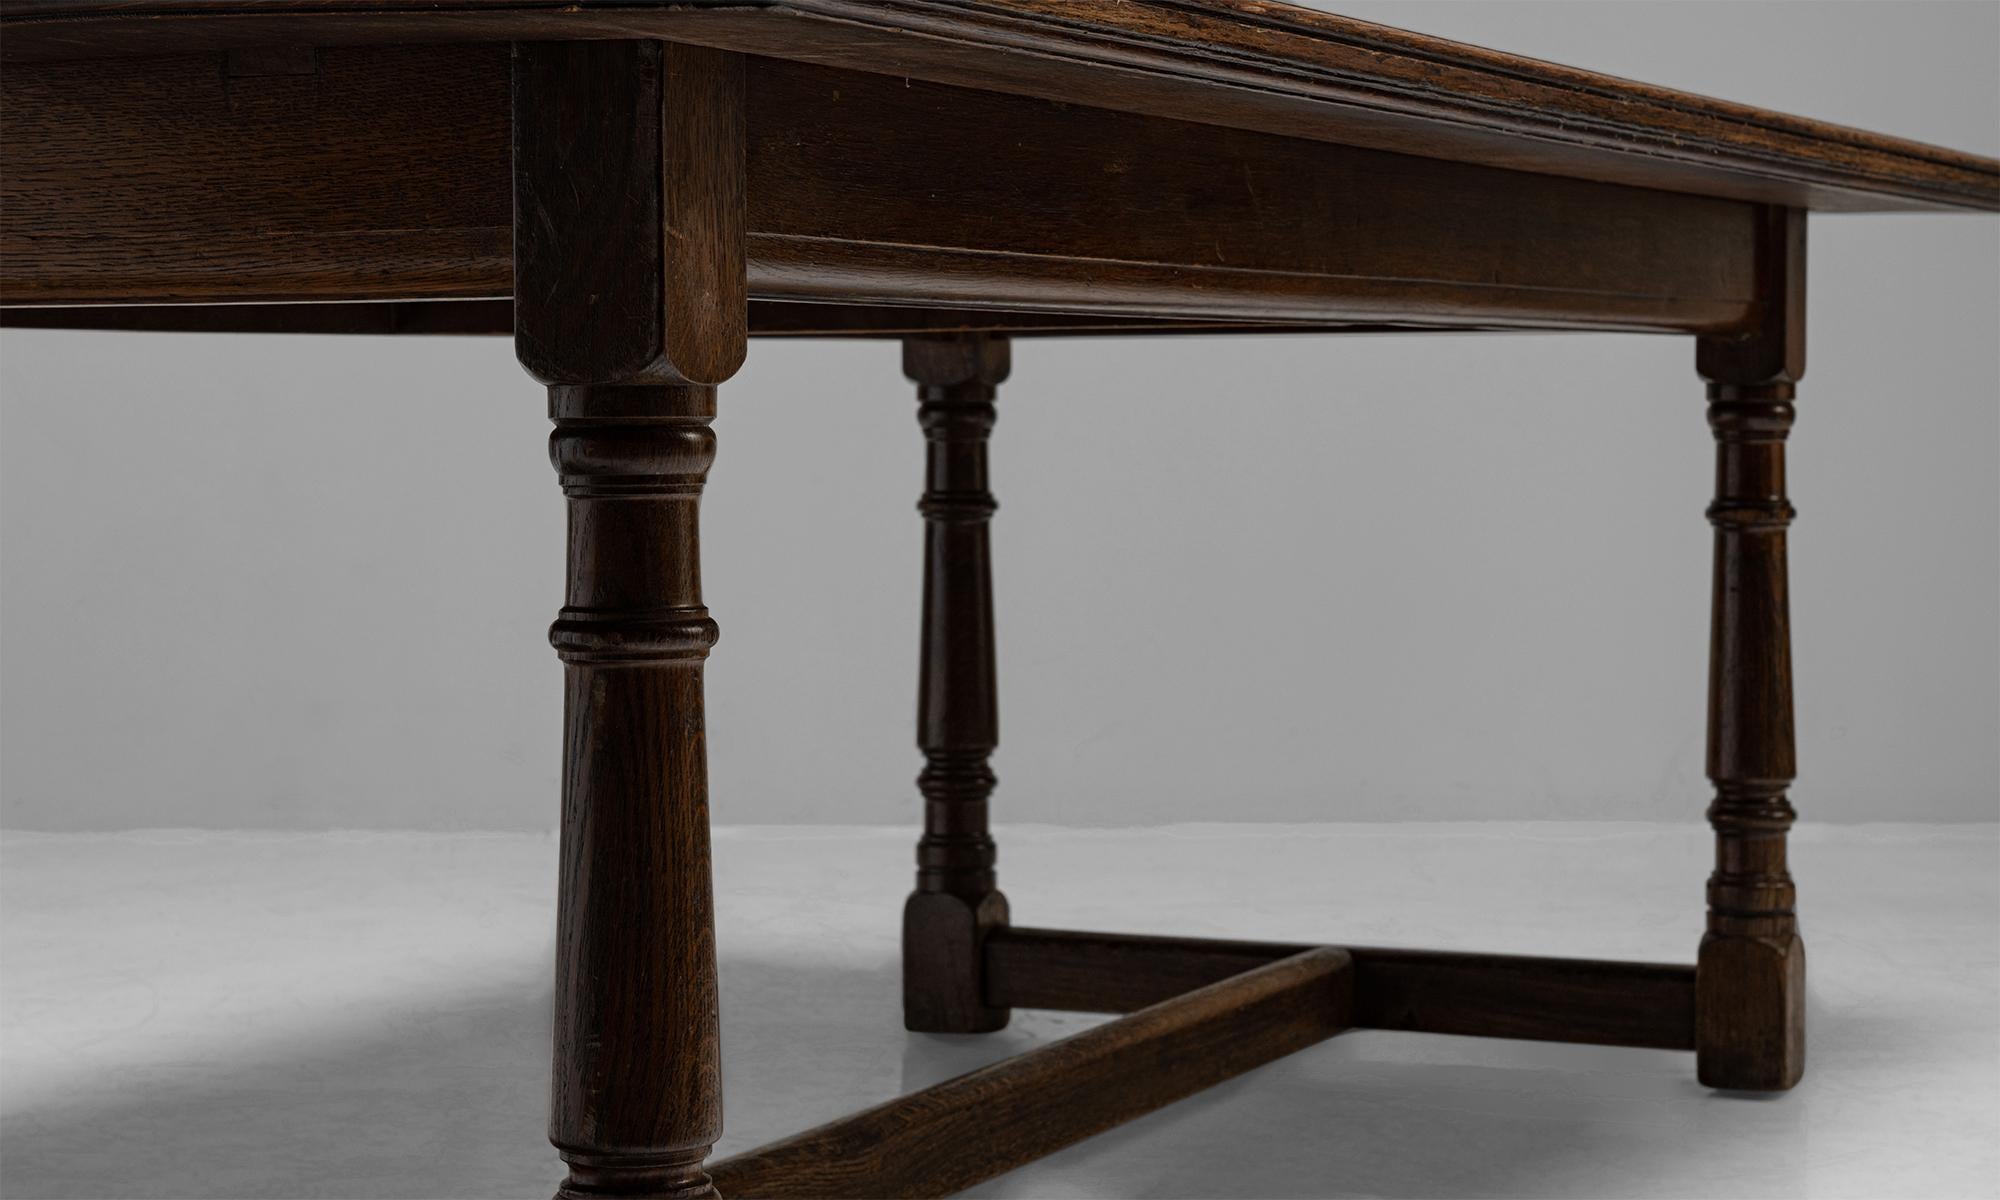 Oak Refectory Dining Table

England circa 1870

Constructed in quarter sawn oak with nicely moulded edge on the tabletop.